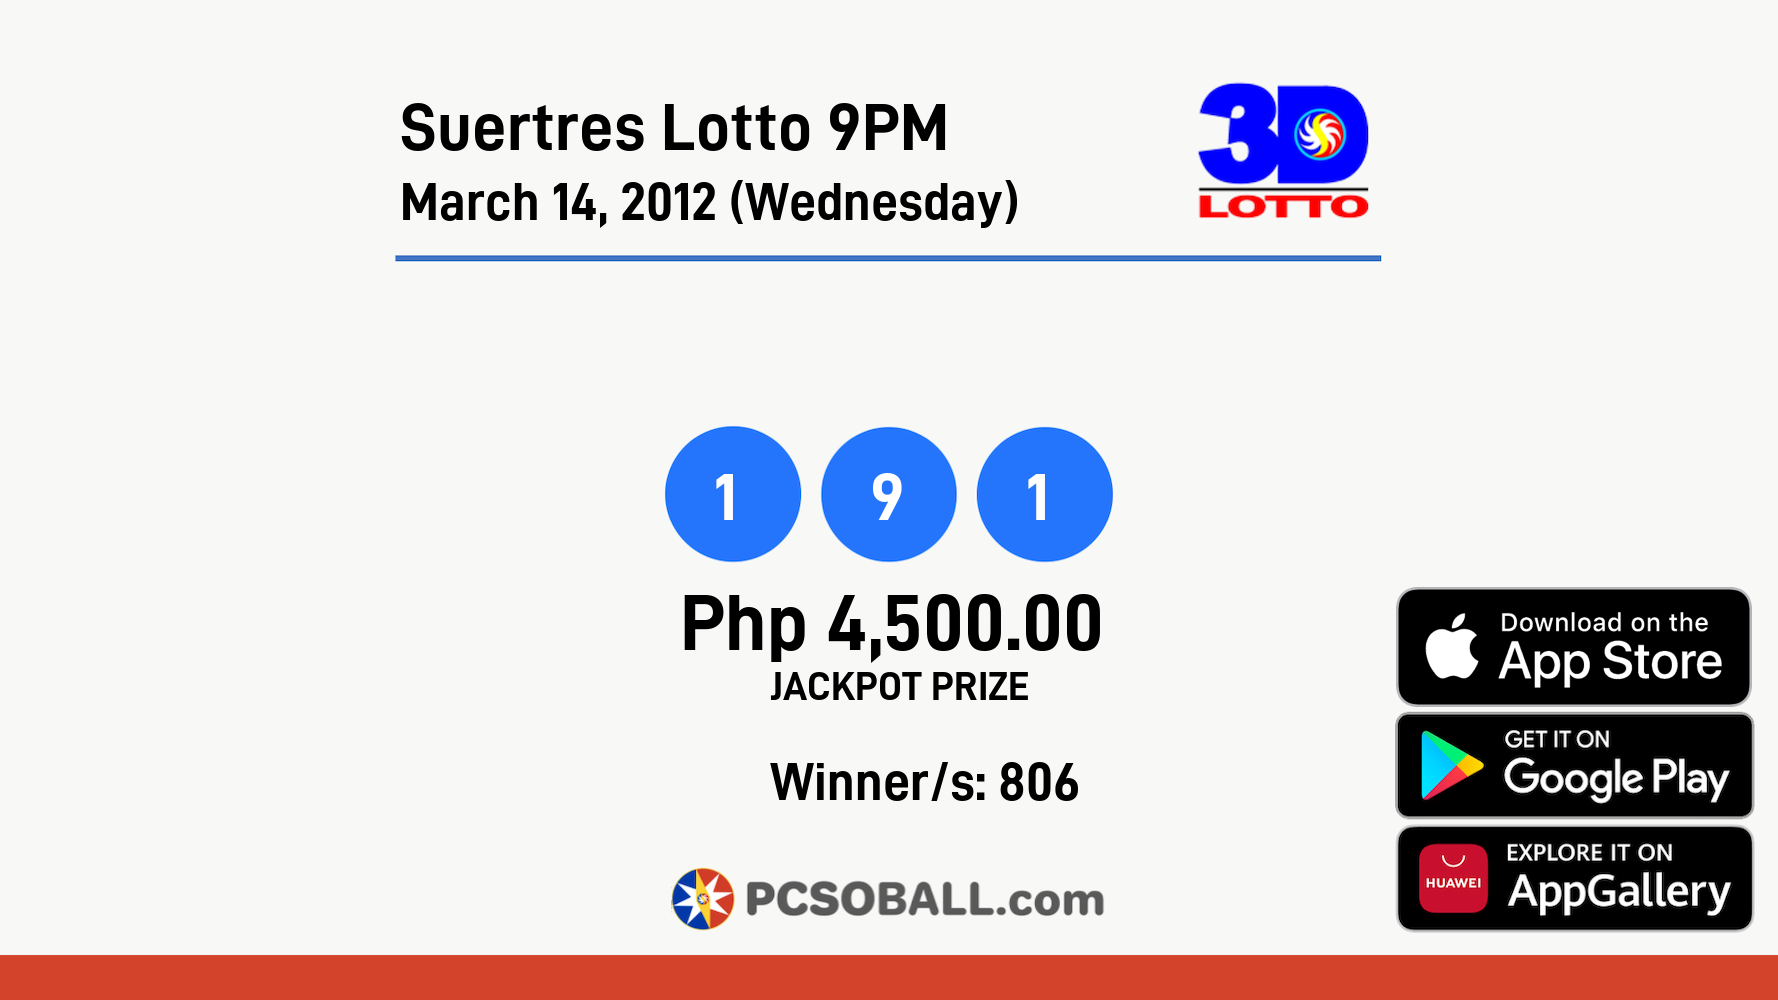 Suertres Lotto 9PM March 14, 2012 (Wednesday) Result